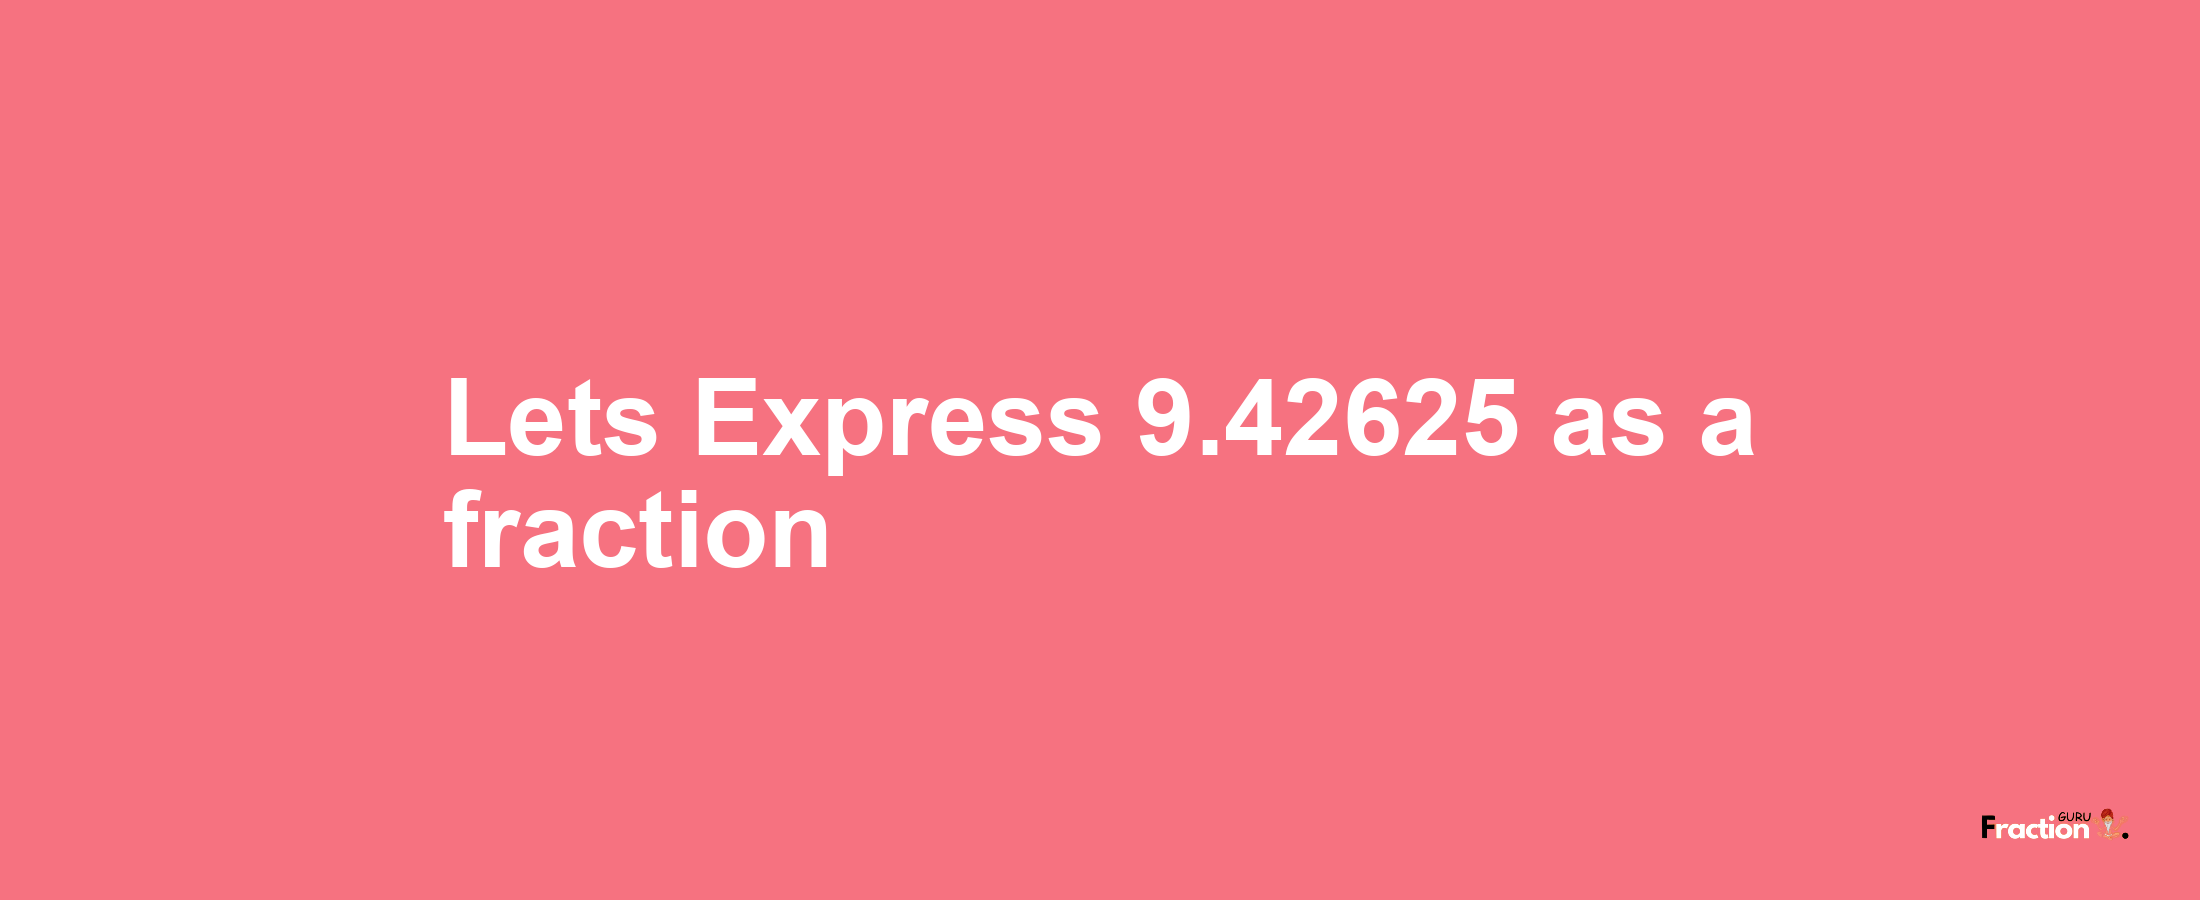 Lets Express 9.42625 as afraction